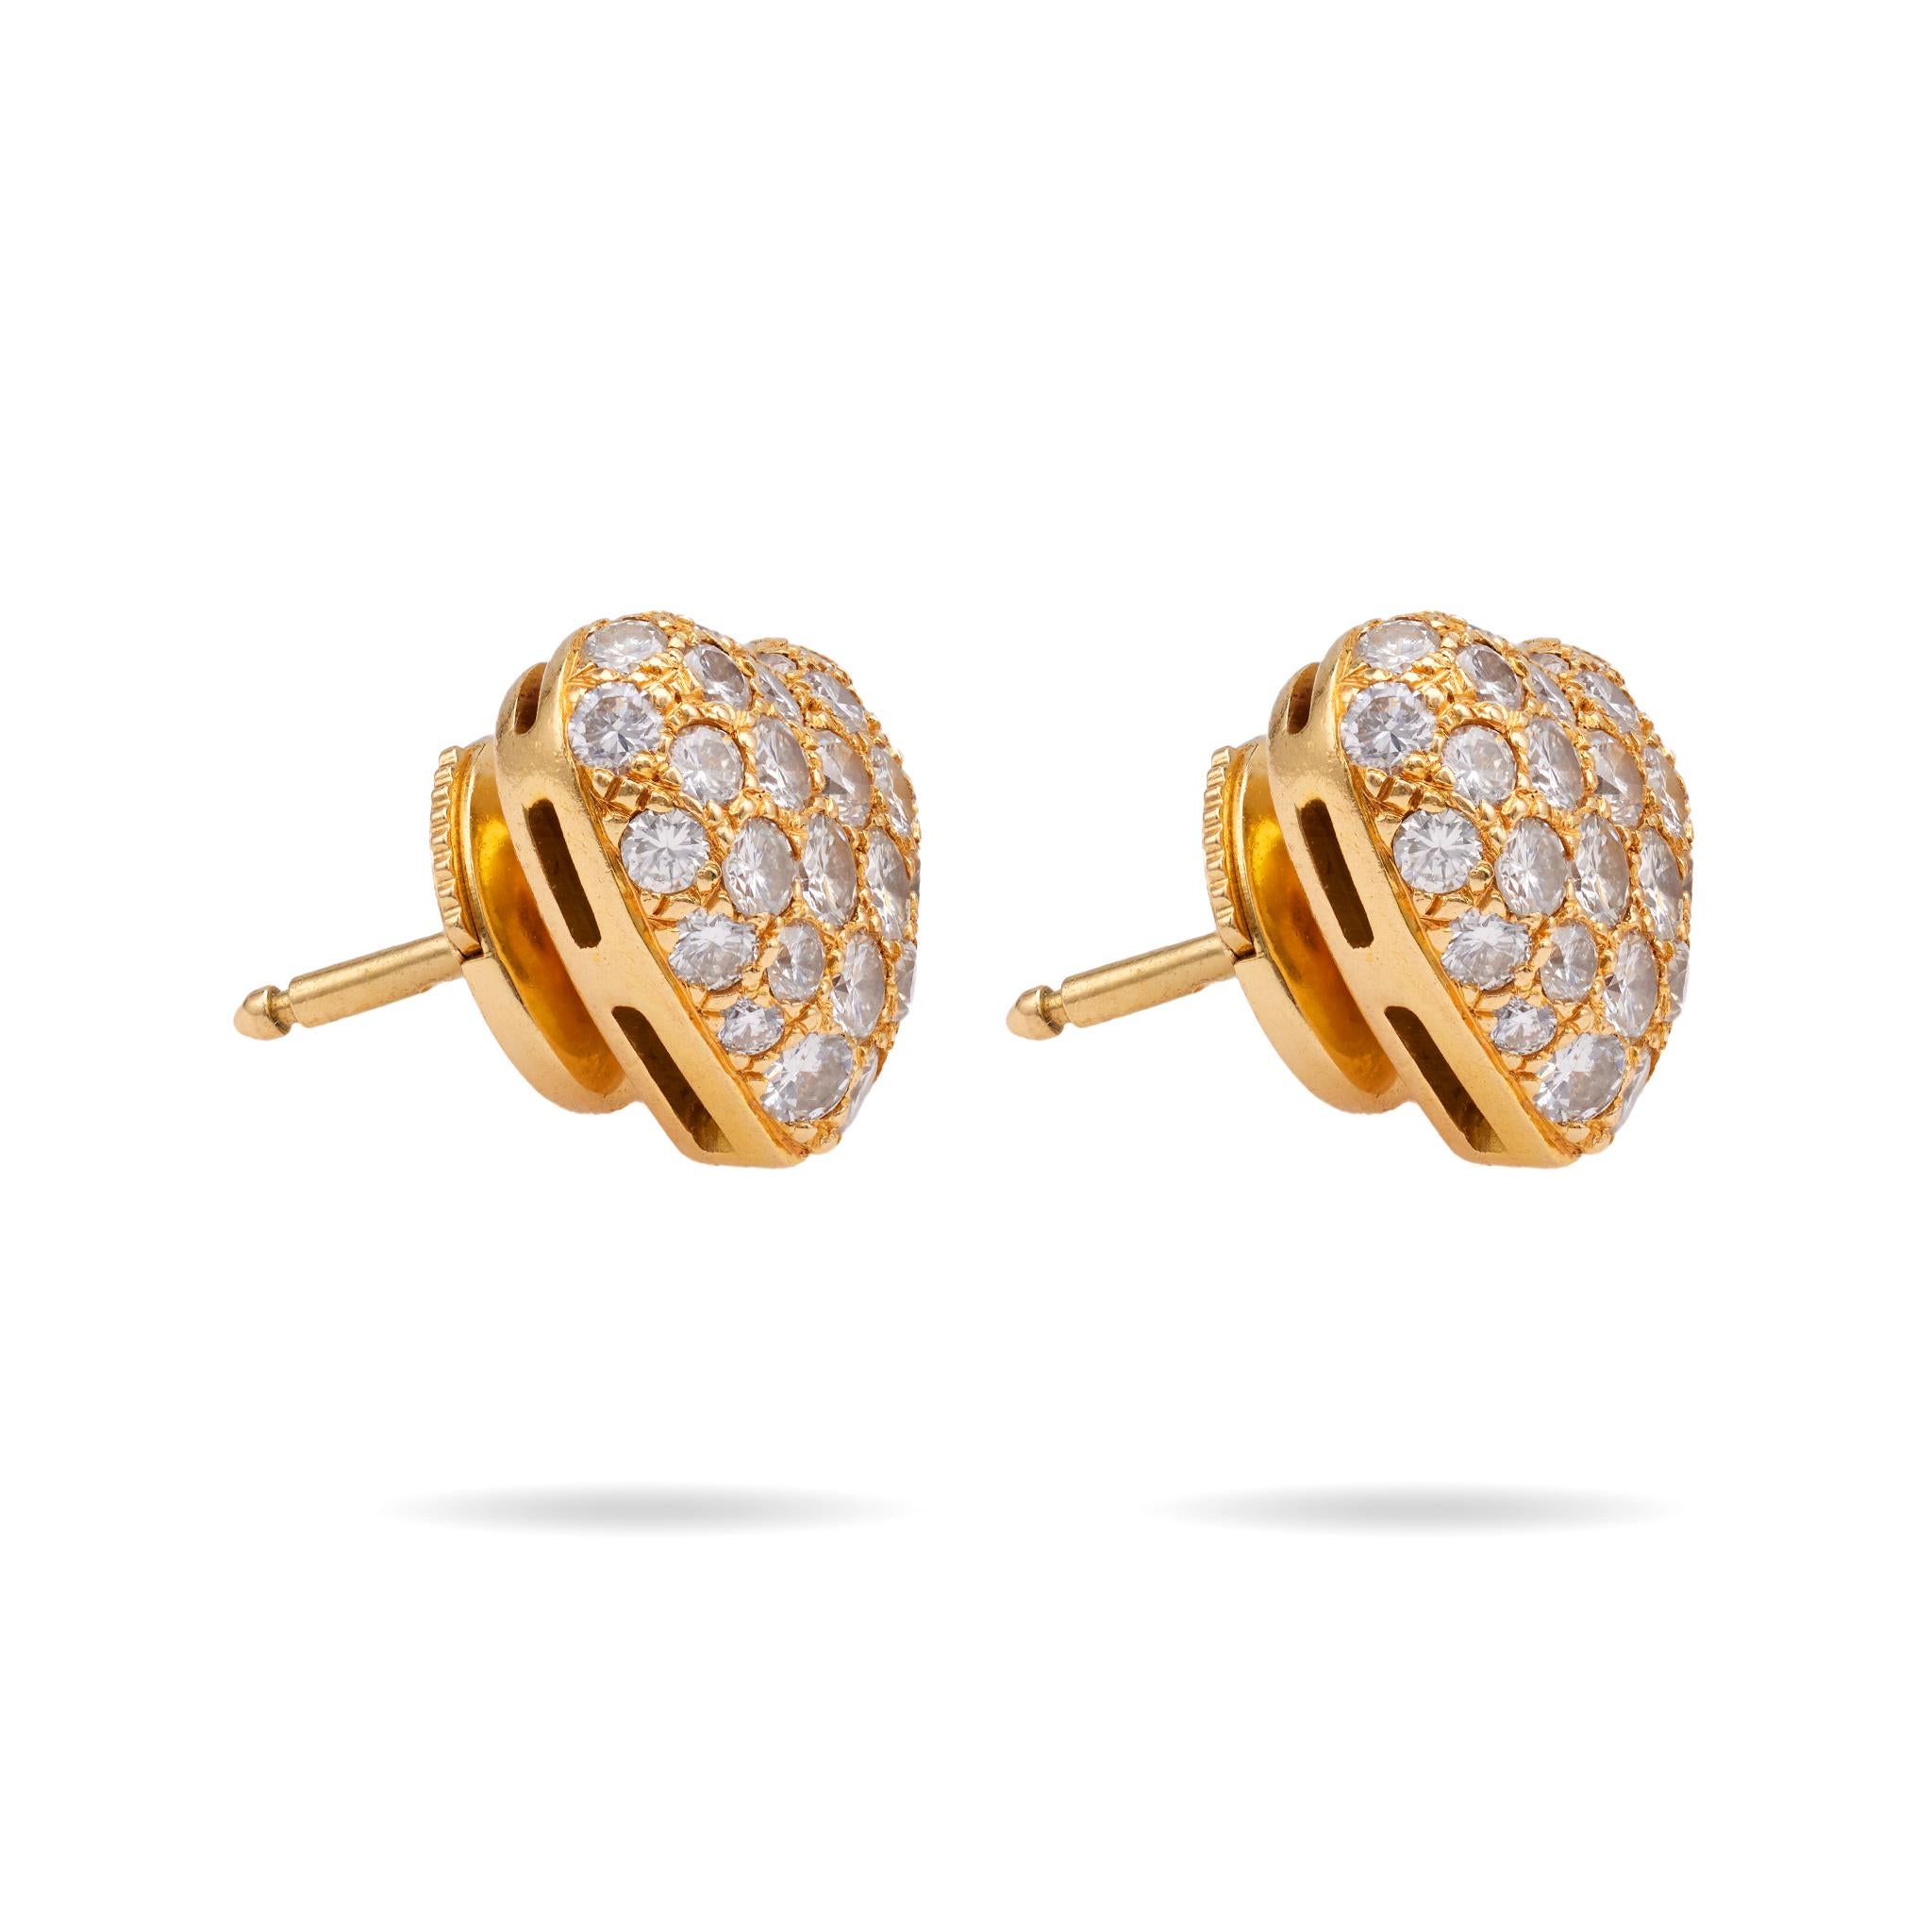 Pair of Cartier 1.20 Carat Total Weight Diamond 18k Gold Heart Stud Earrings In Excellent Condition For Sale In Beverly Hills, CA